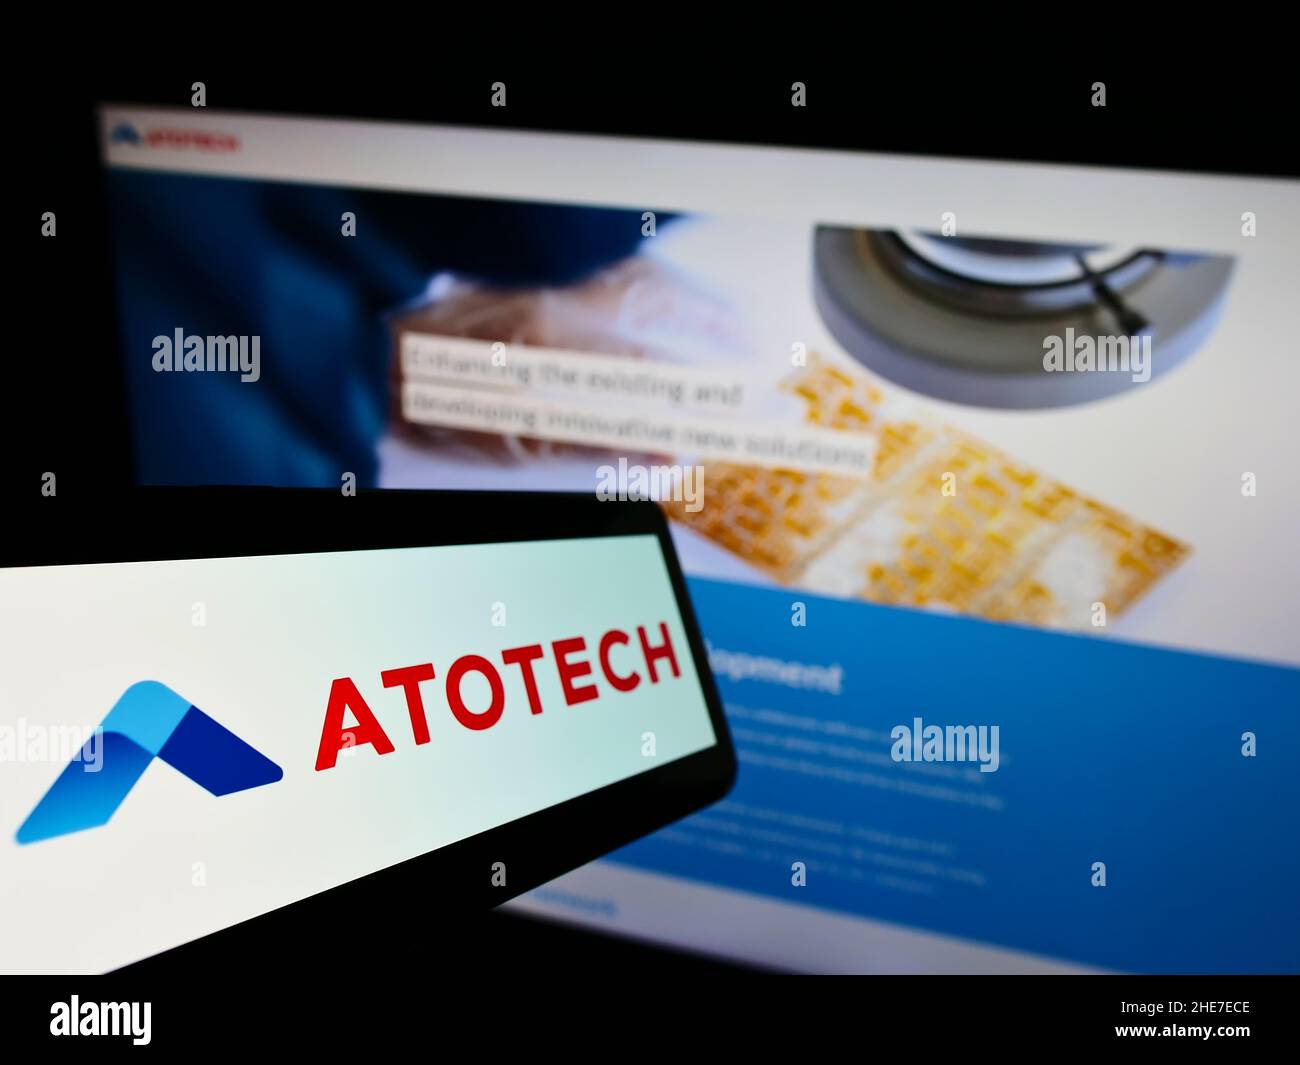 Smartphone with logo of chemical company Atotech Deutschland GmbH on screen in front of business website. Focus on center-left of phone display. Stock Photo